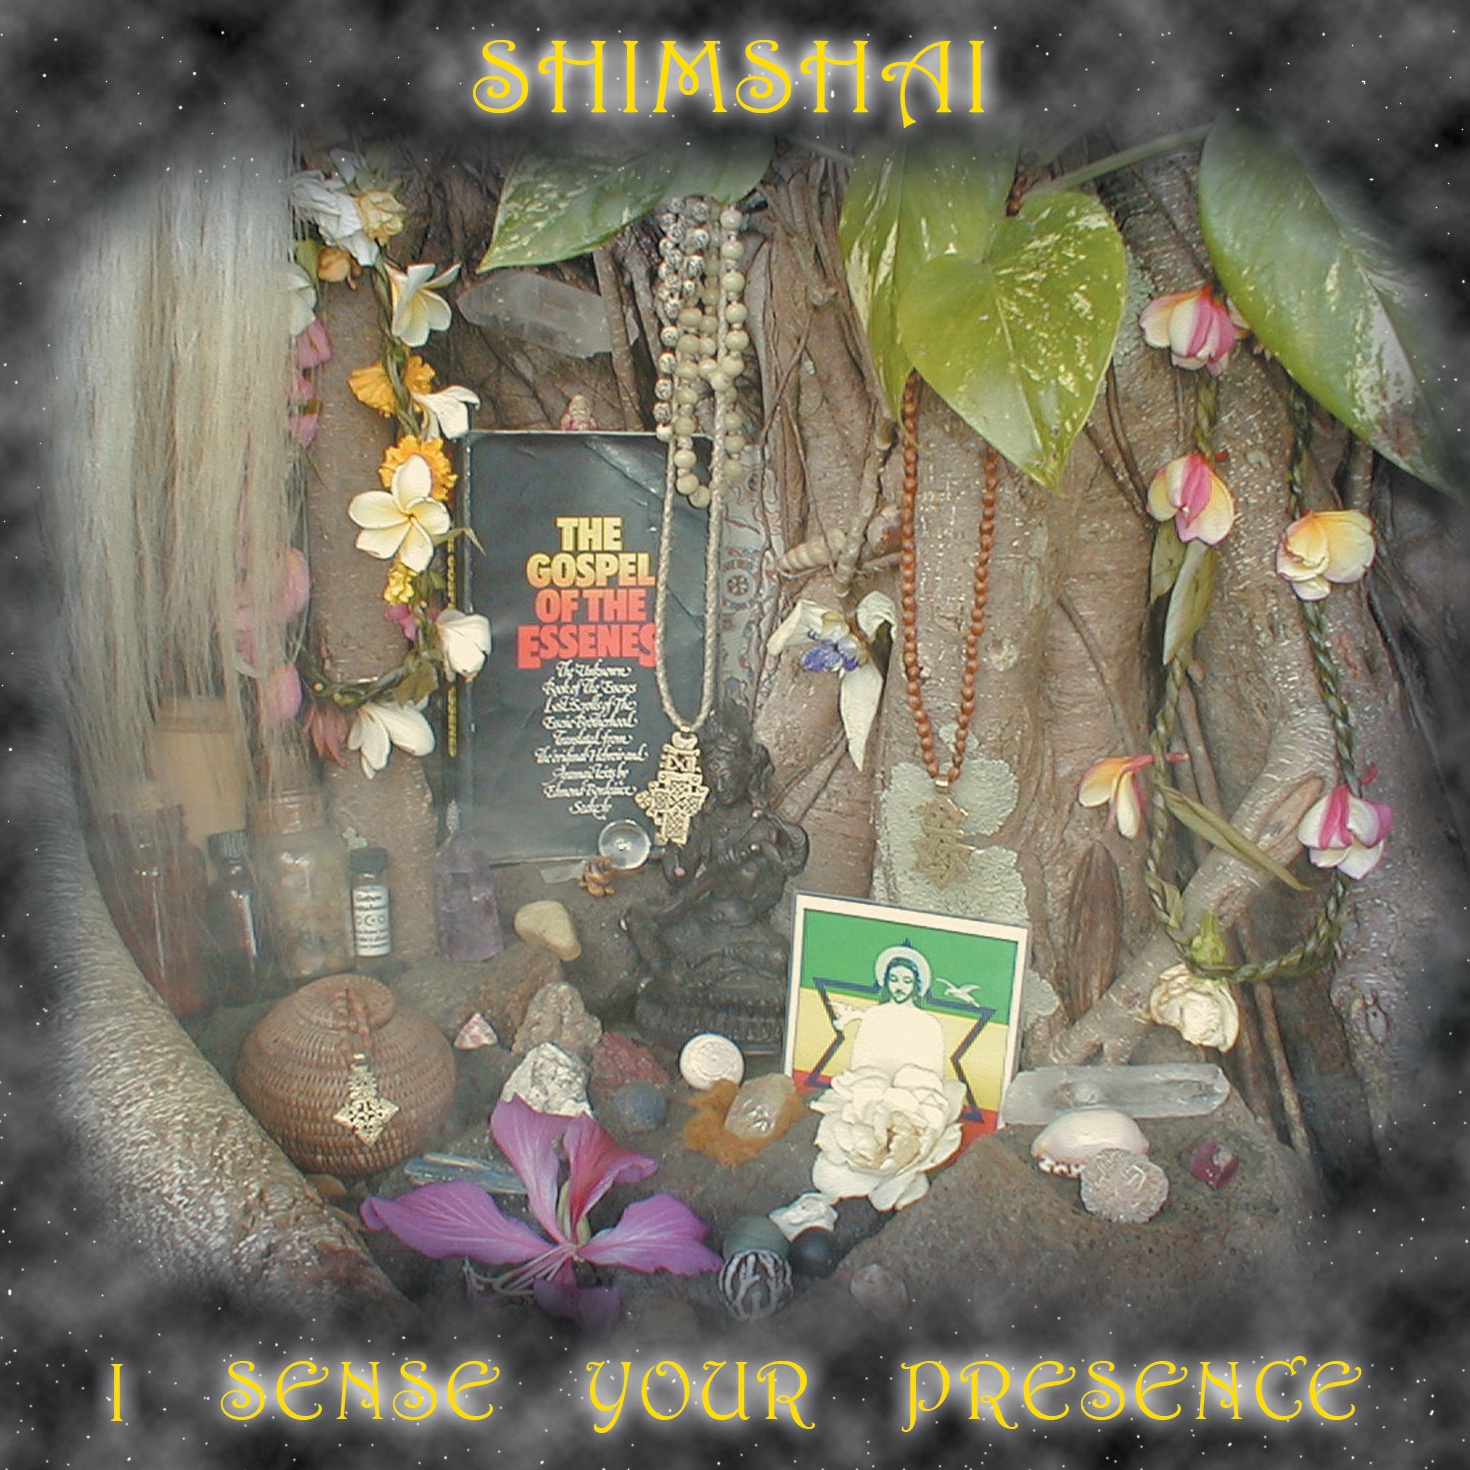 Better Way by Shimshai from the album I Sense Your Presence, original roots reggae music with a deep spiritual message